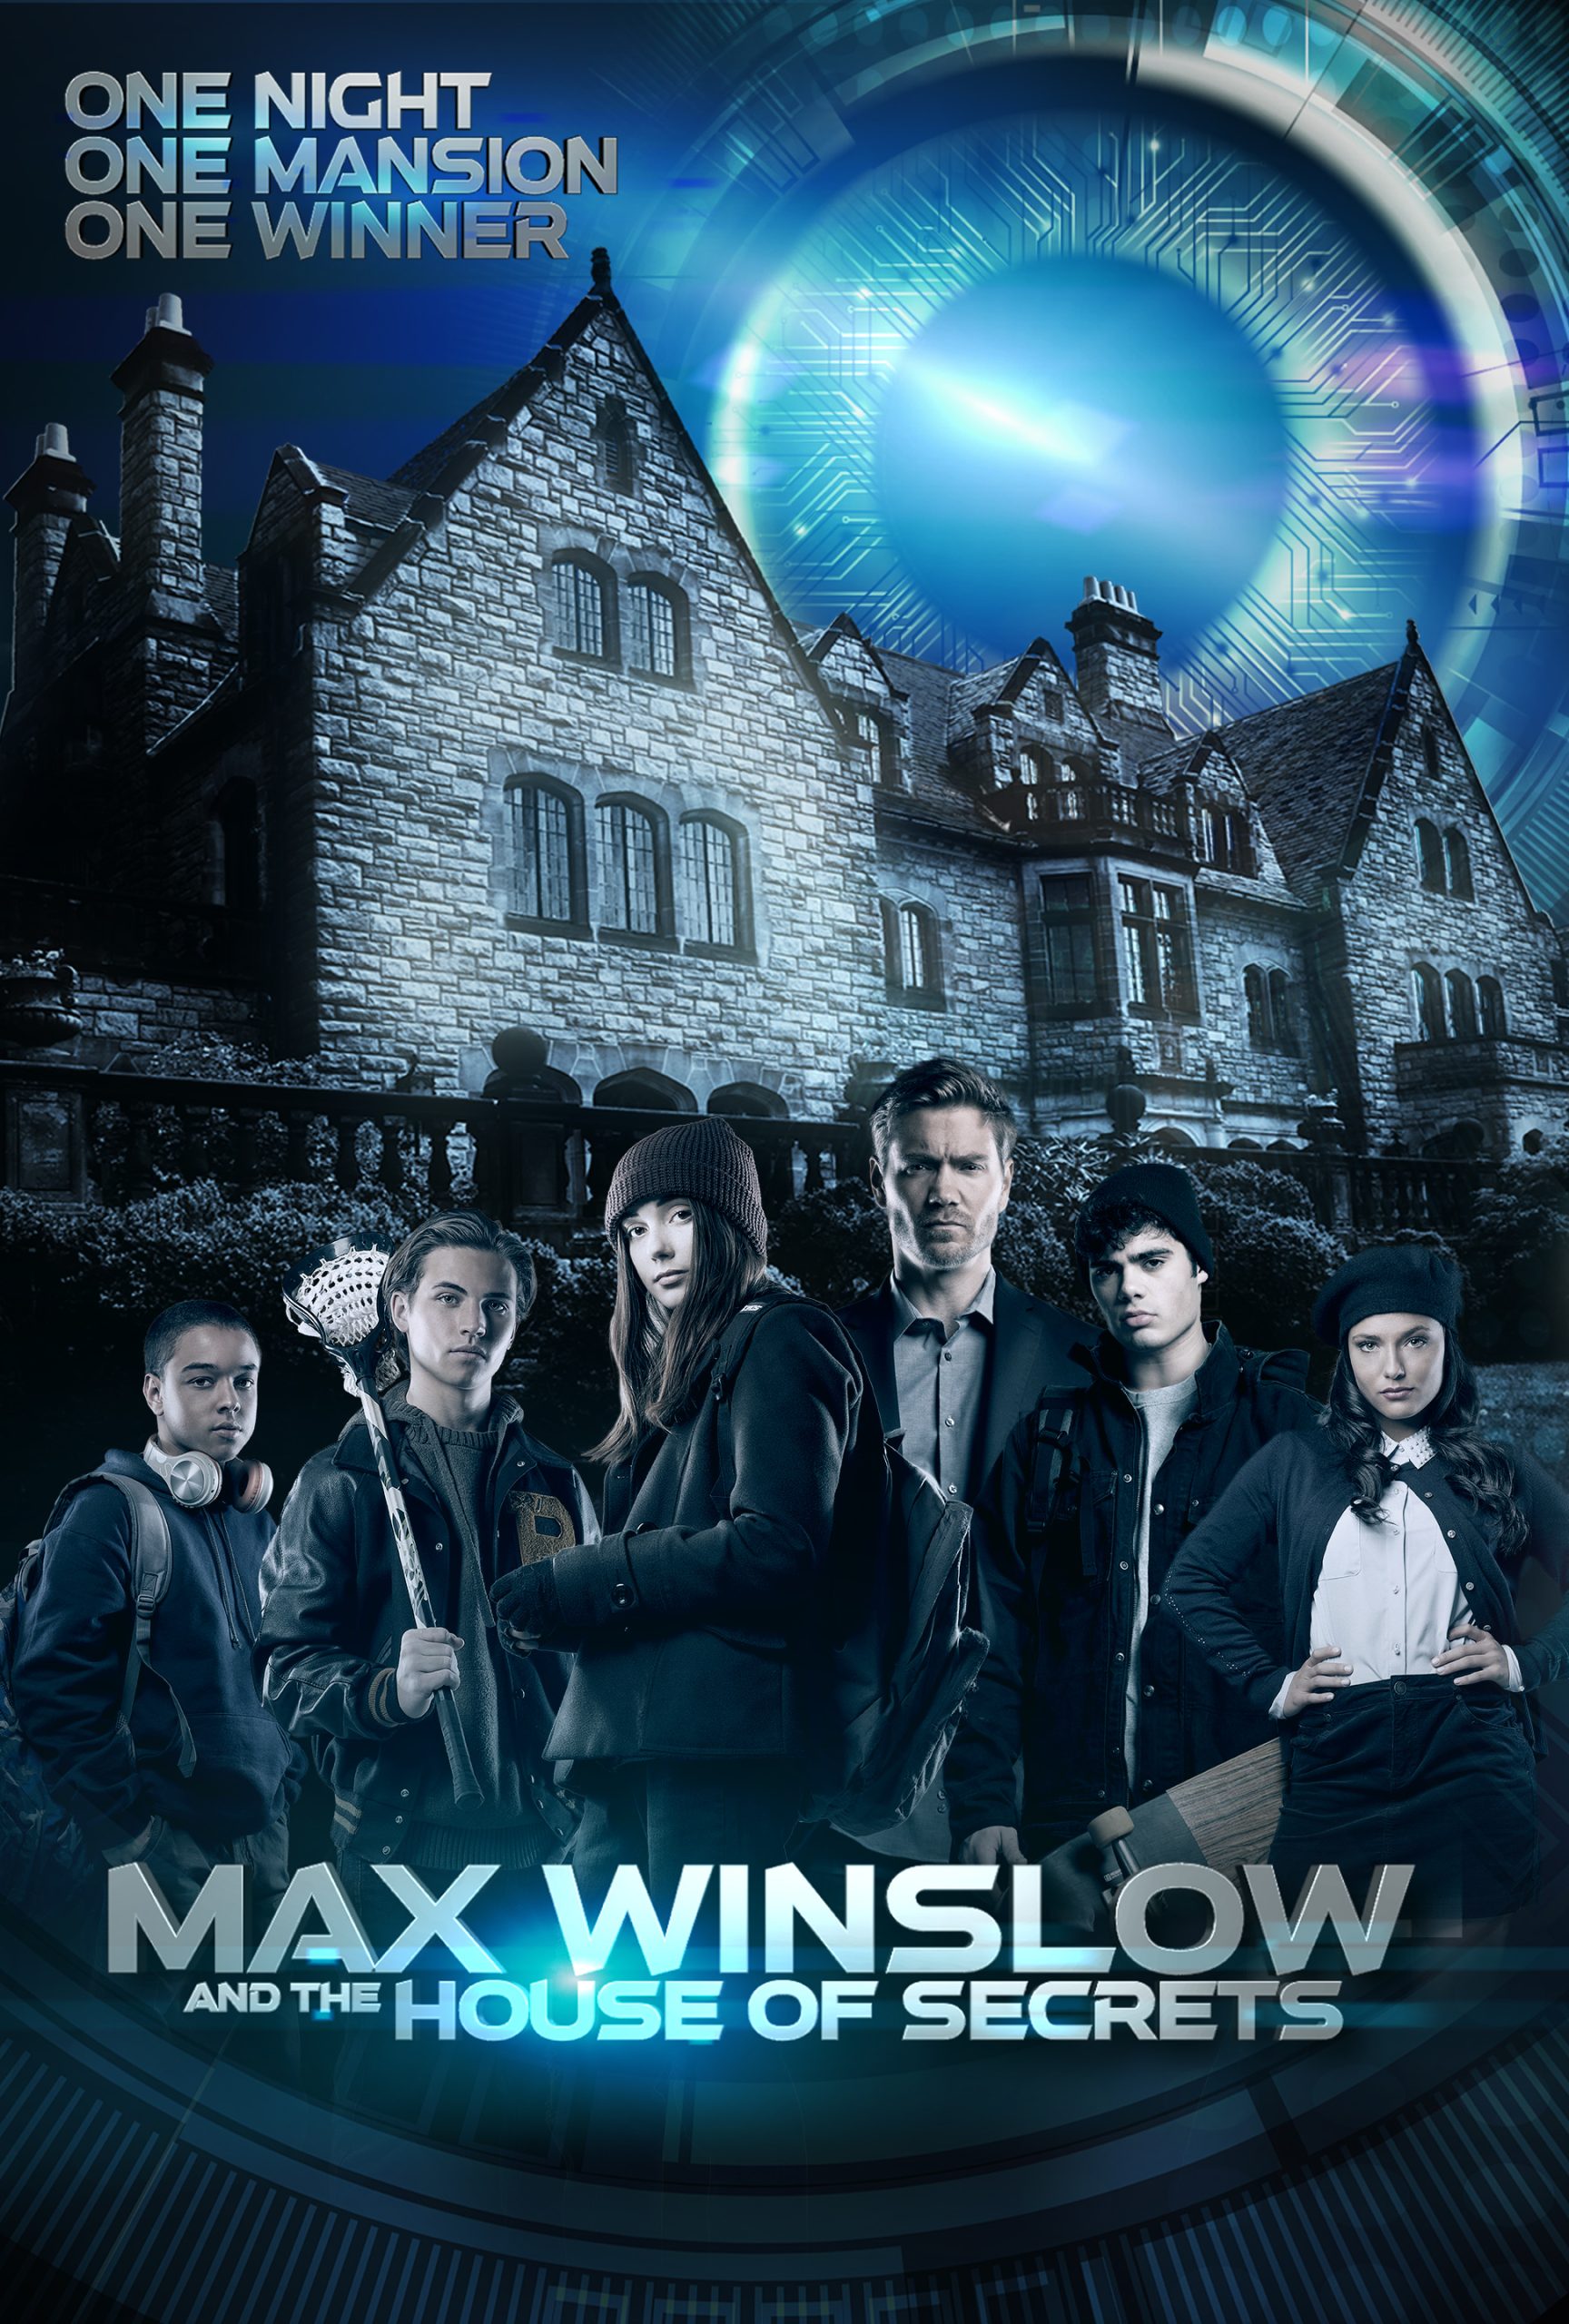 Max Winslow and the House of Secrets (2019) Chad Michael Murray